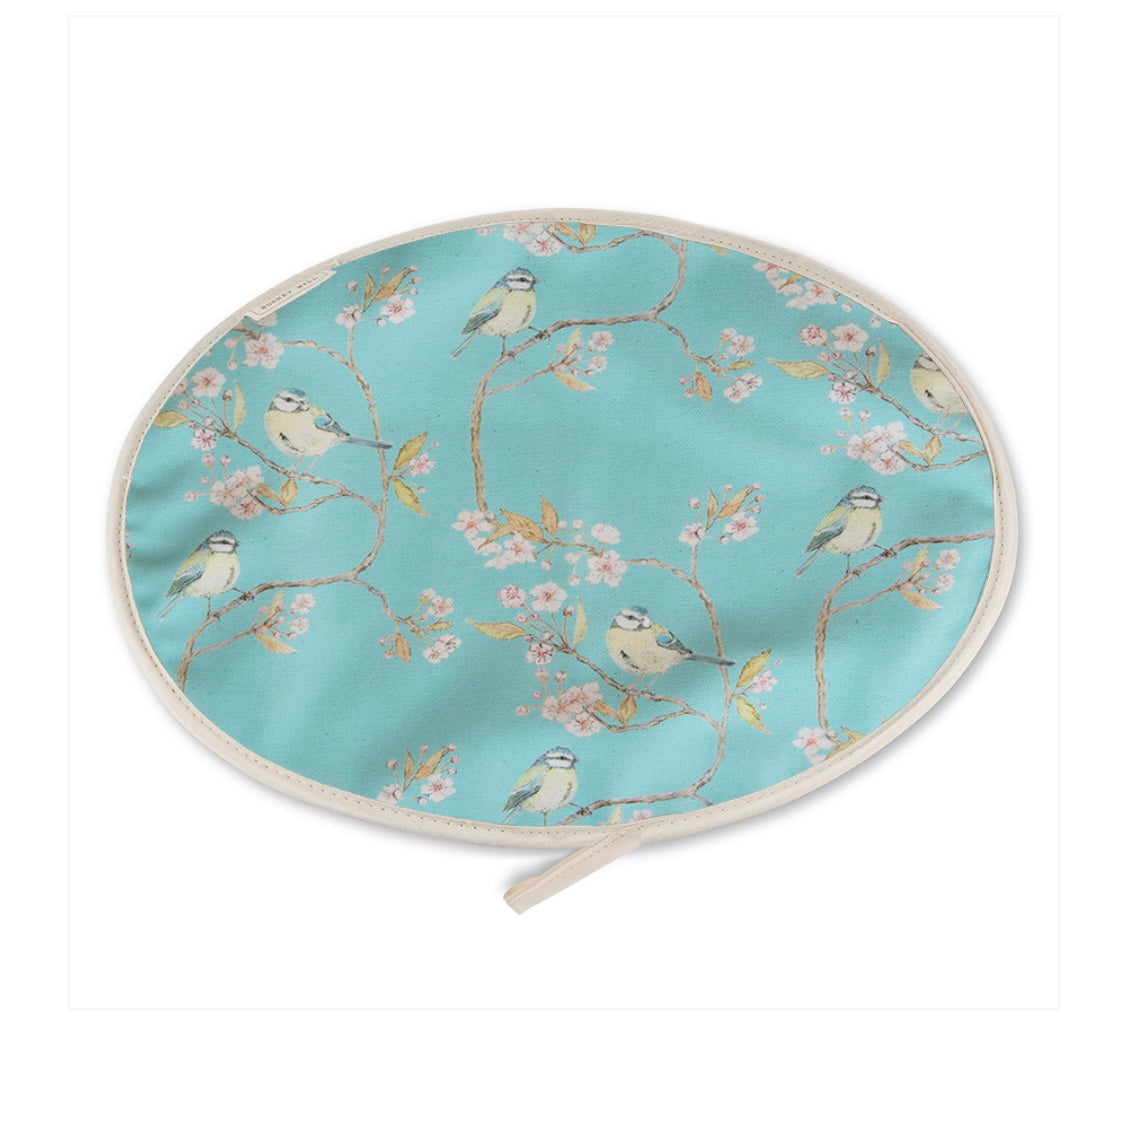 BLUE TIT HOB COVER - PINK OR TURQUOISE